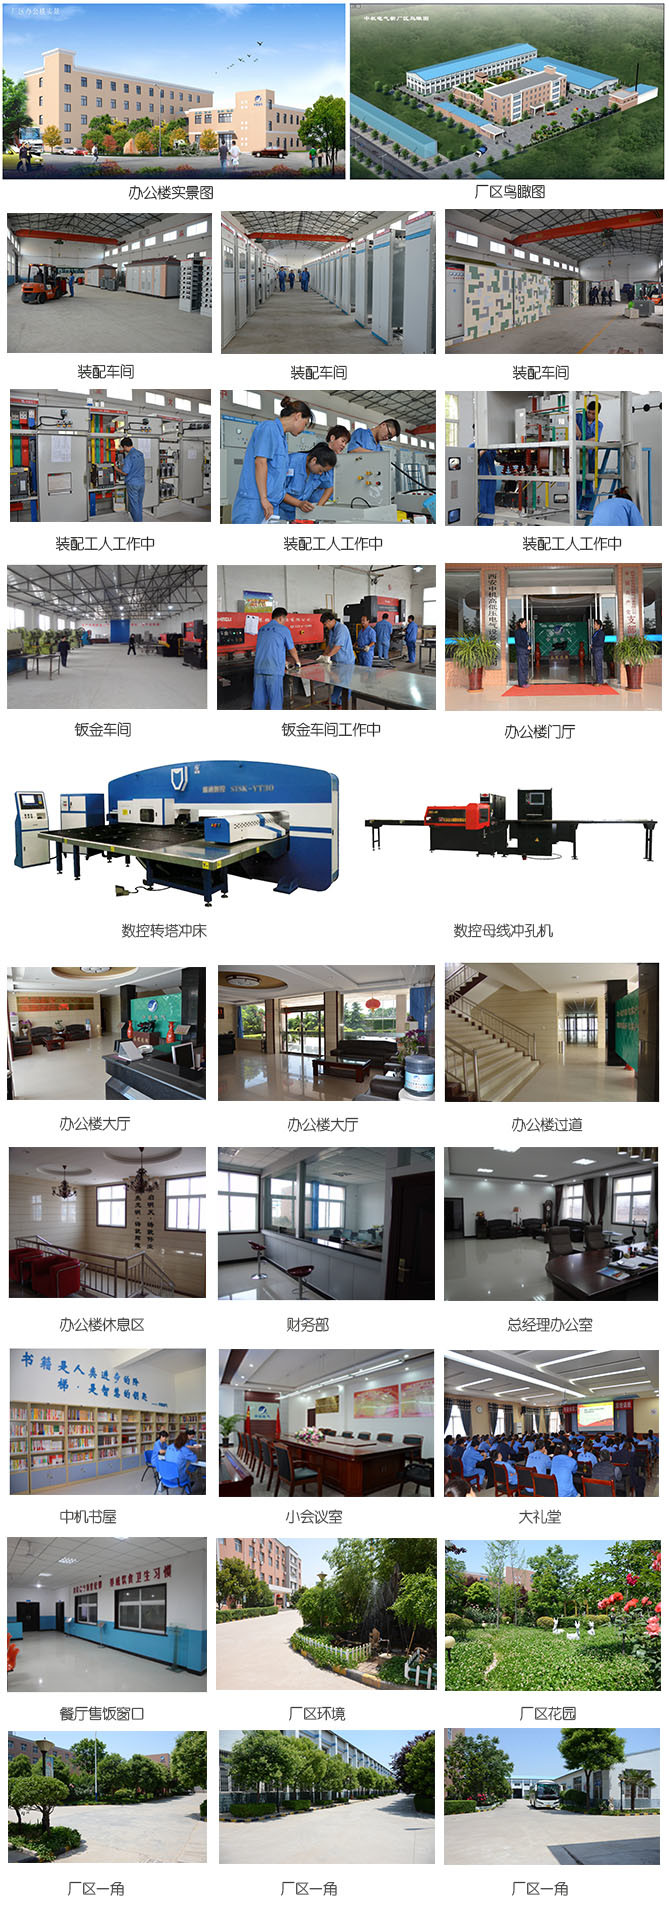 Low-Voltage Ggd, Gcs, Gck, Mns, Electric Equipment Ring Mainunit Power Distribution, Control and Compensation Switchgear